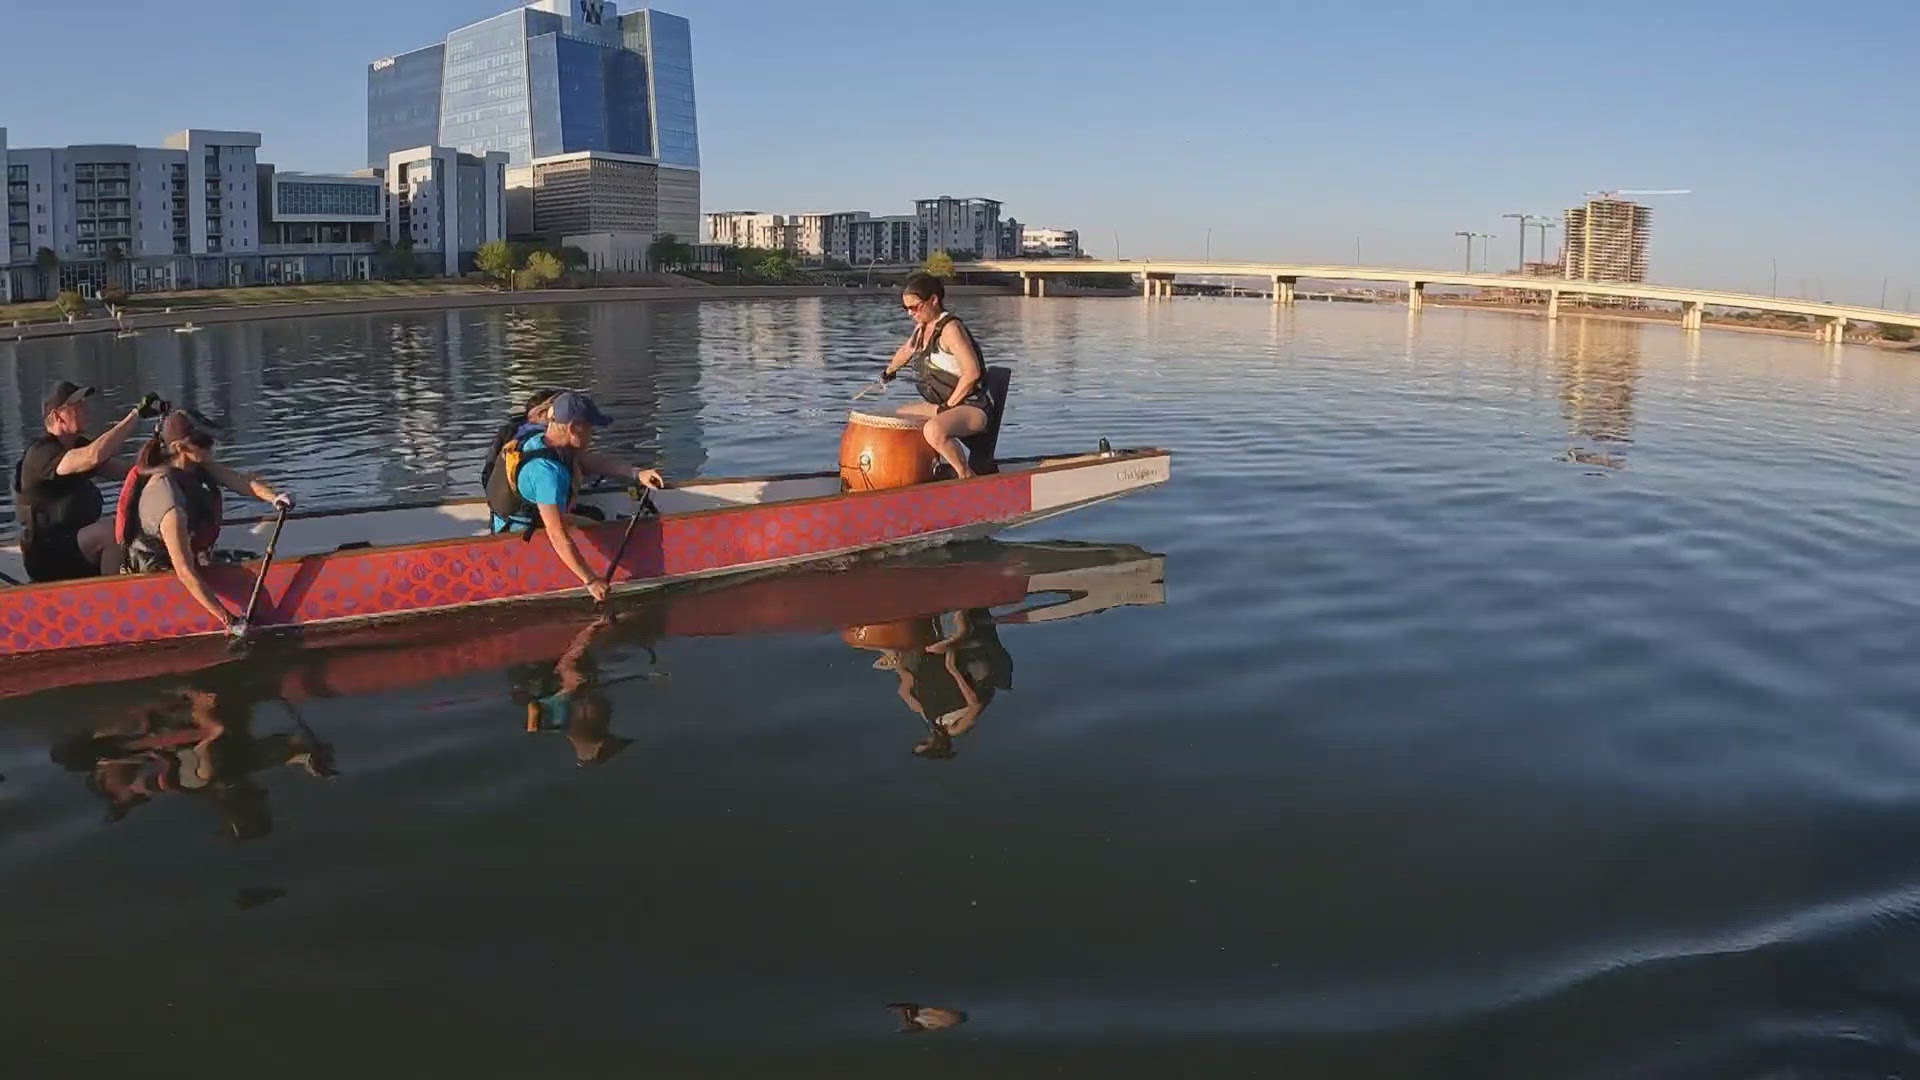 A group of Valley residents have fallen in love with the sport of dragon boat racing. Learn more about the team as they practice at Tempe Town Lake.